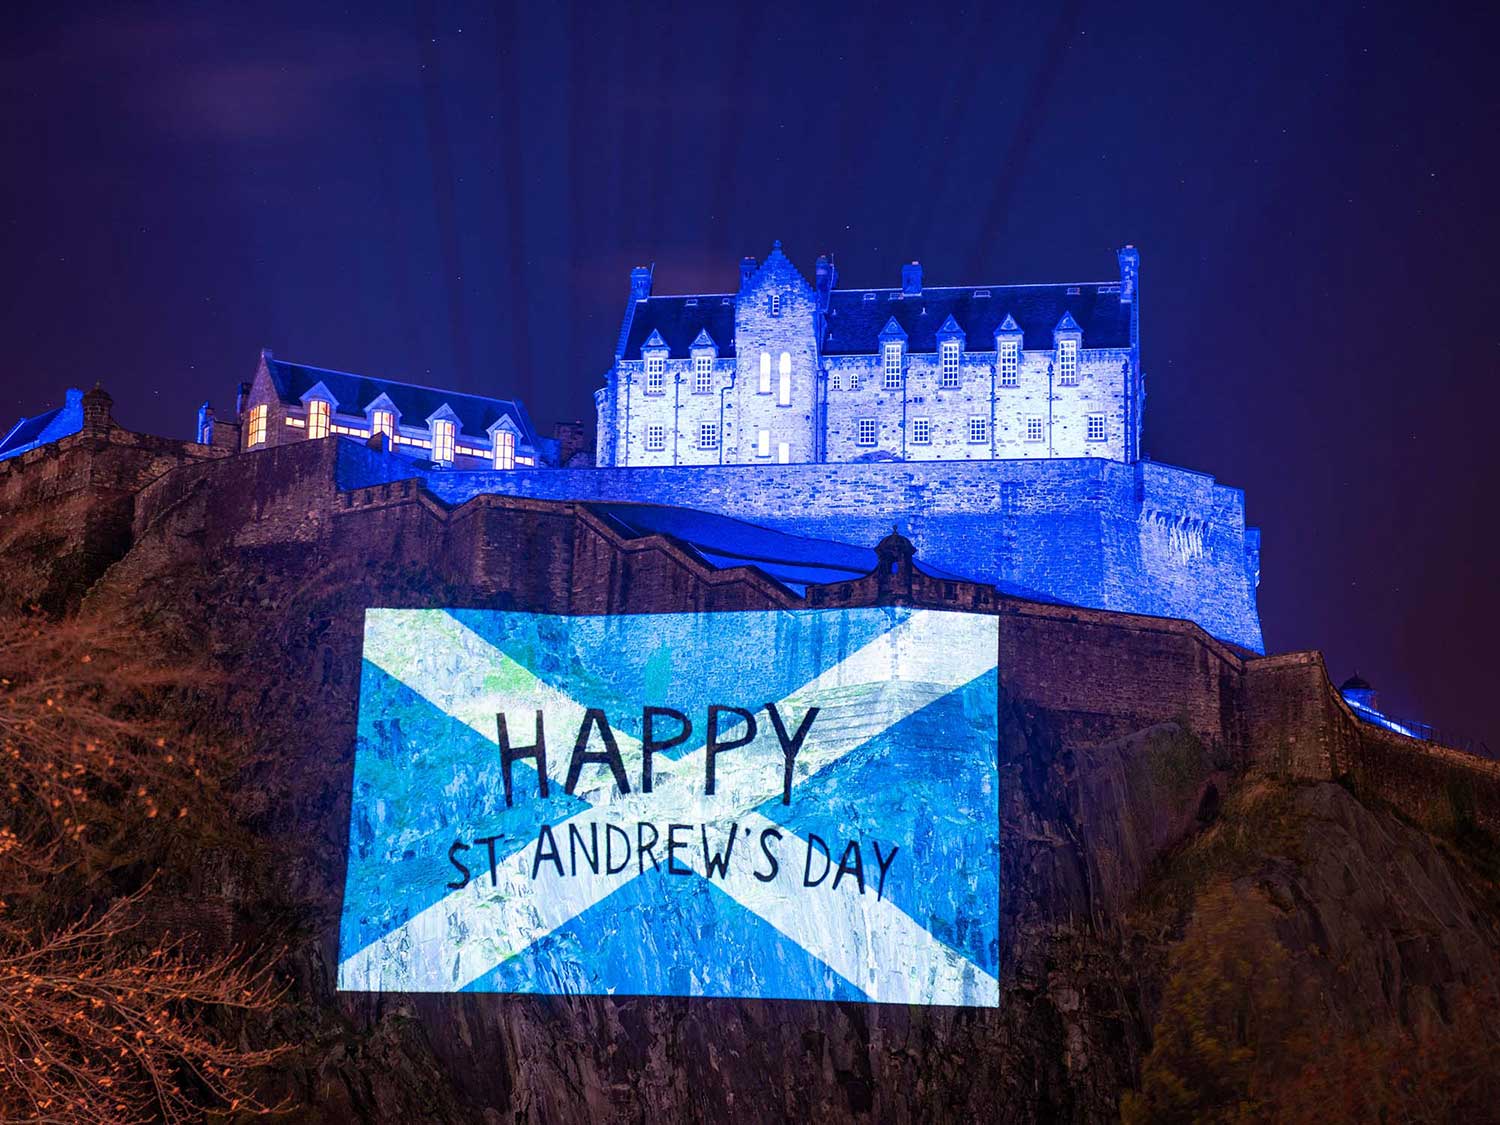 Scottish Governmemt Timelapse Guerrilla Projections film, for st andrews day